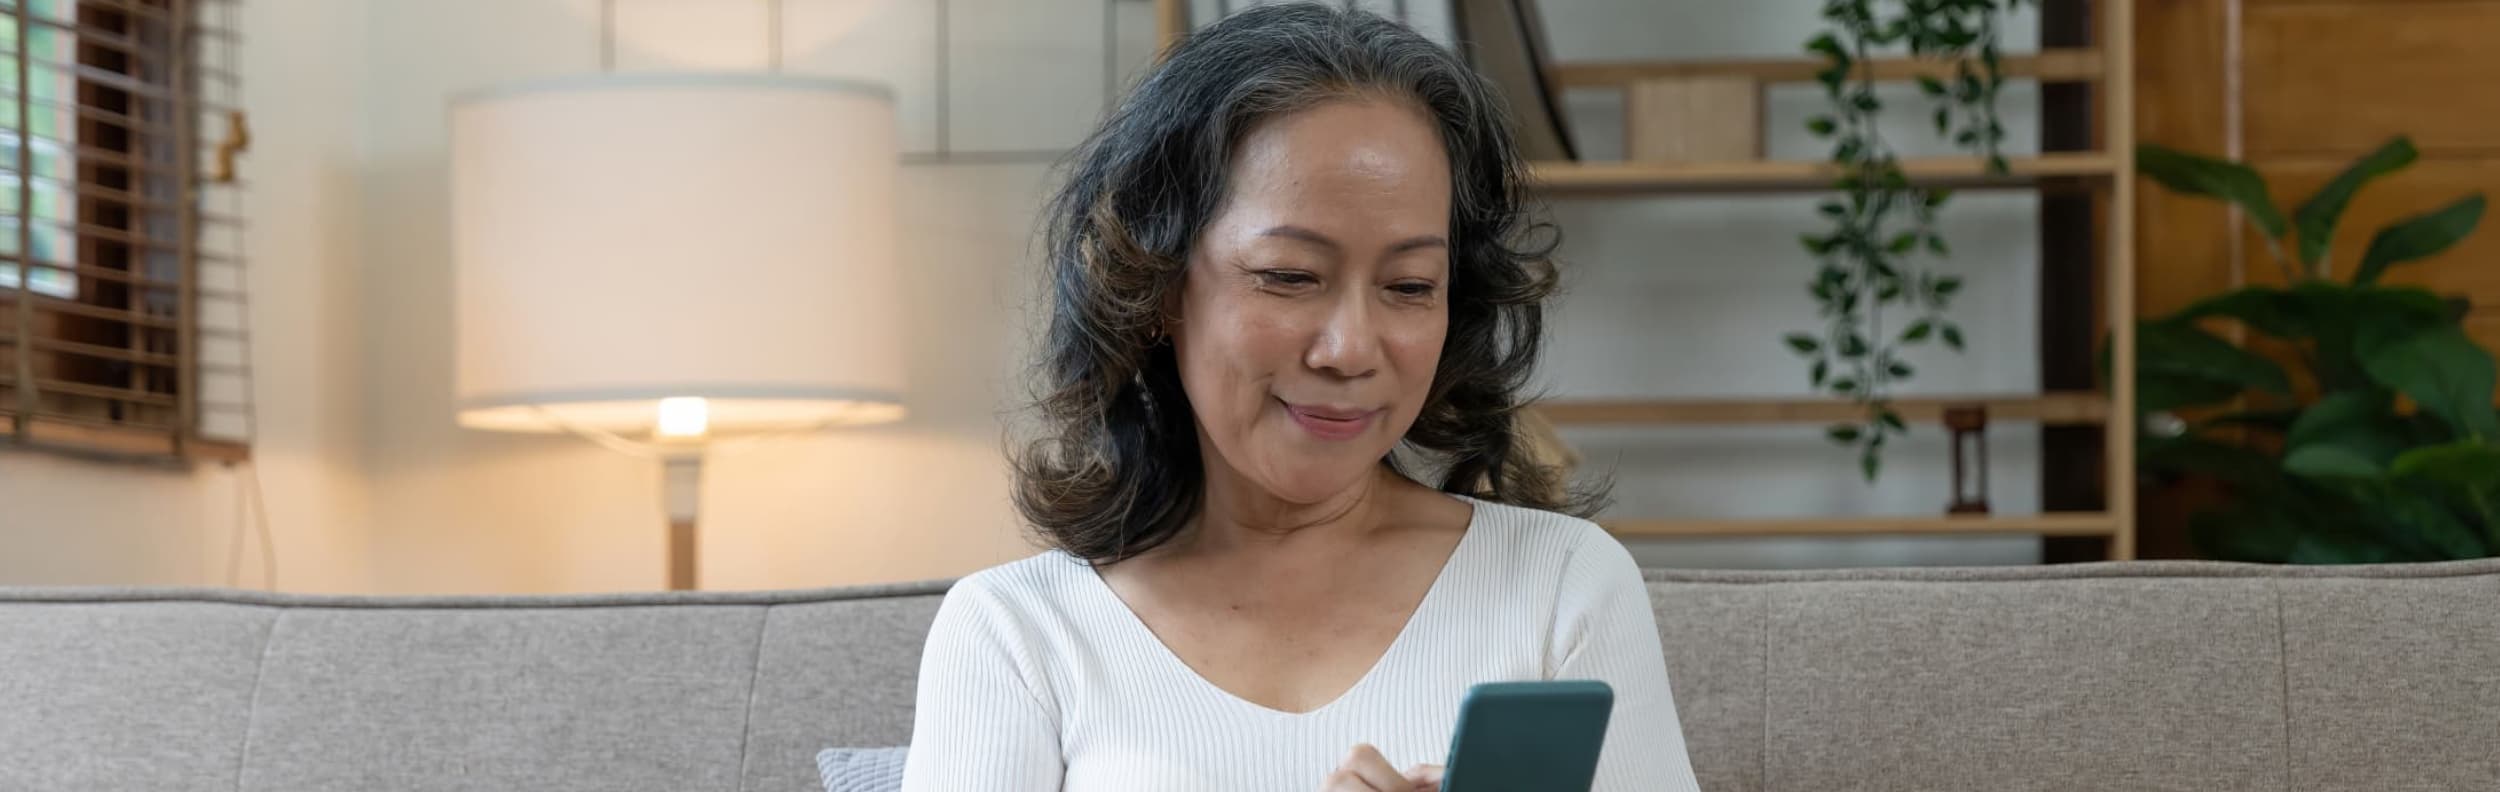 woman sitting on couch using phone